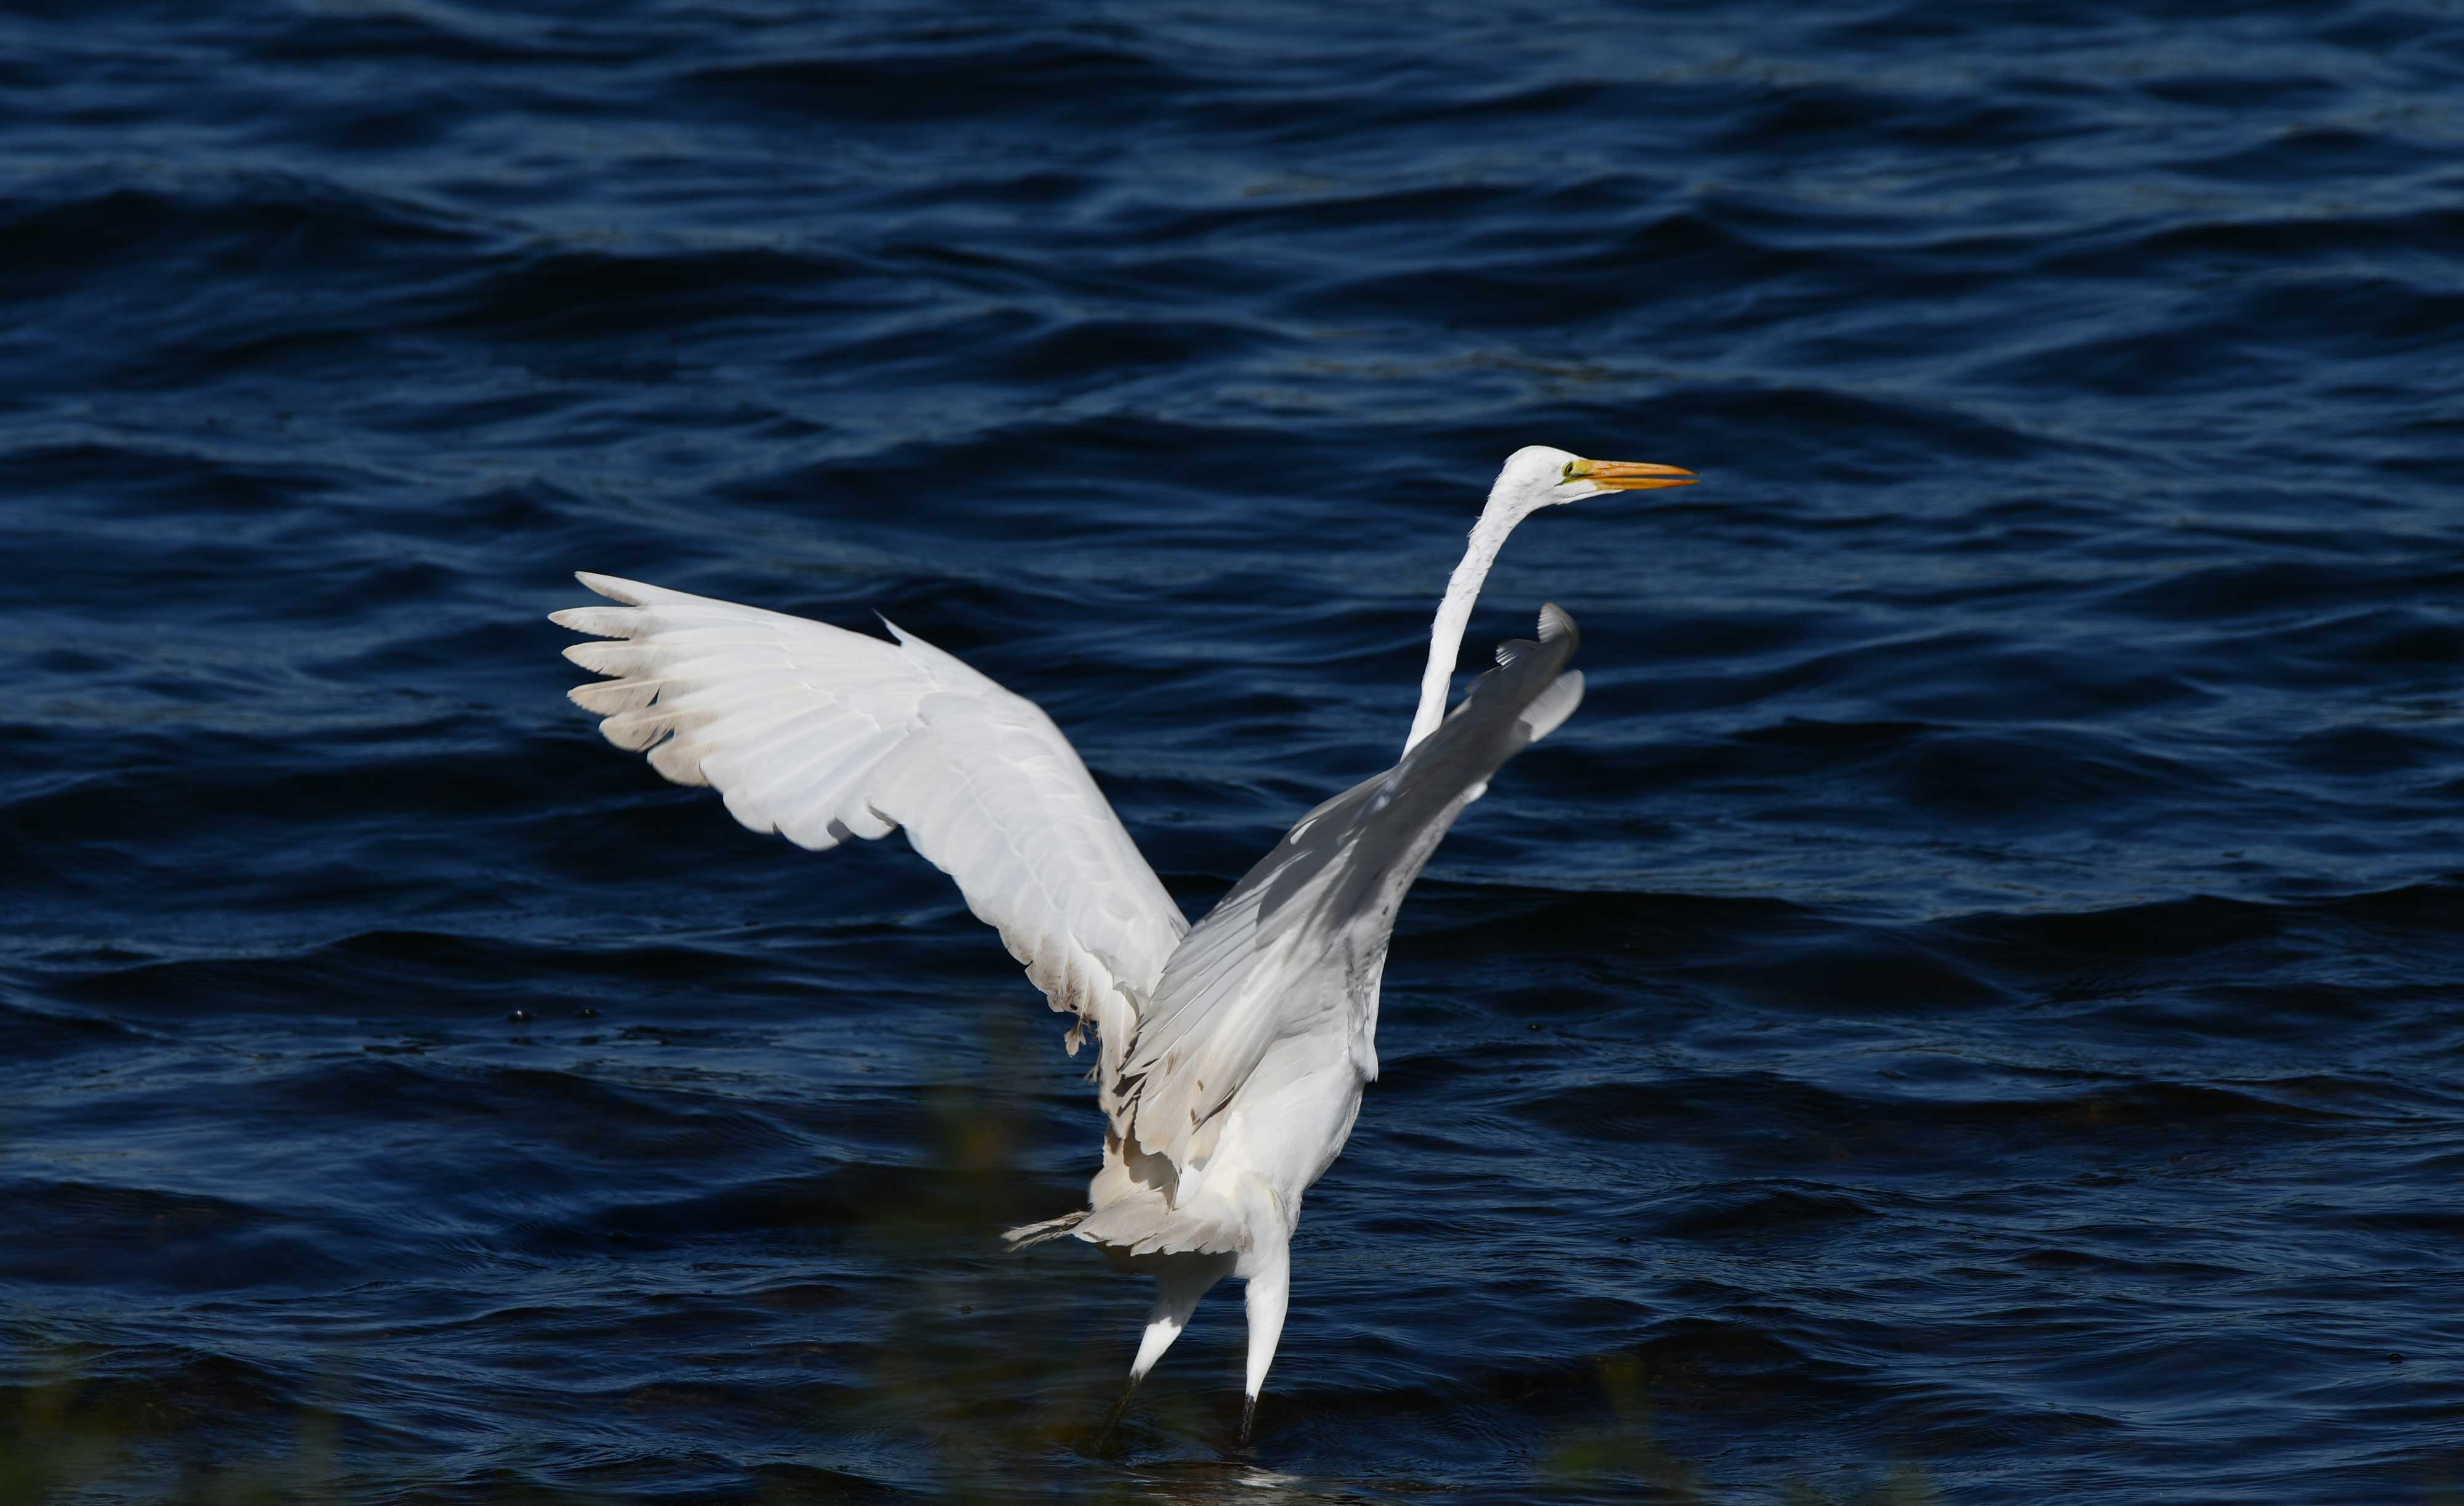 A great egret in the water.